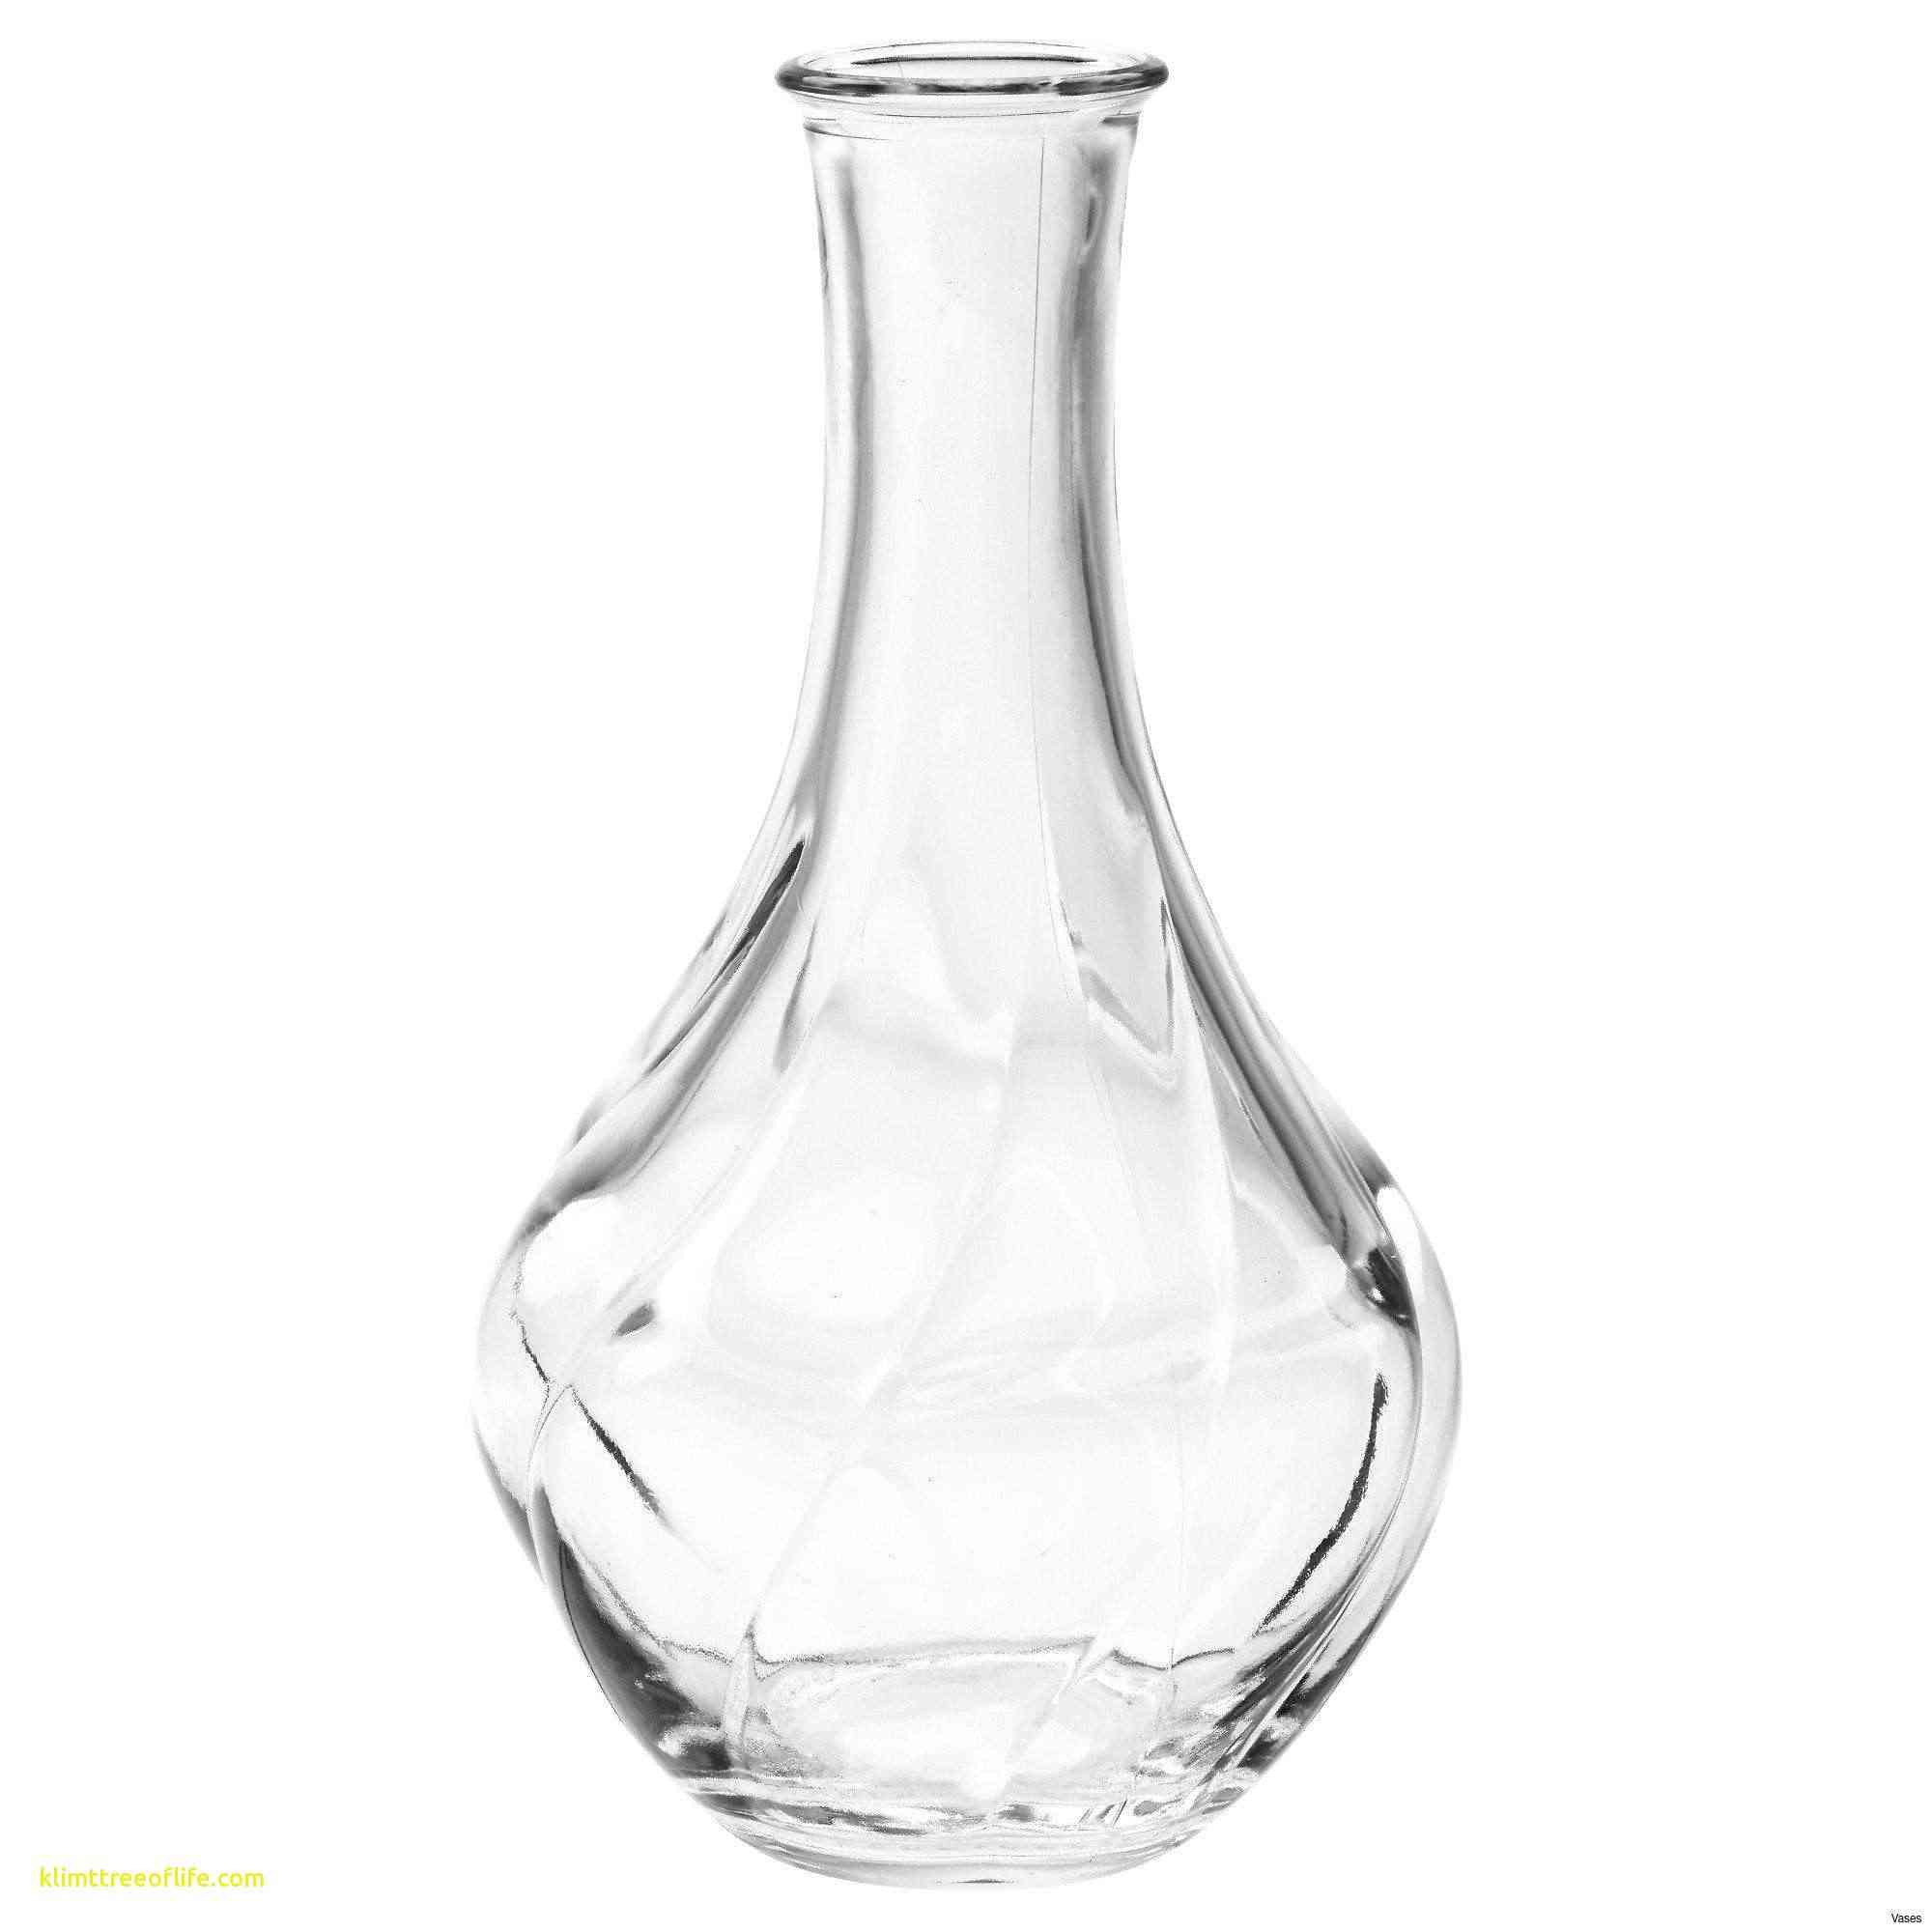 10 Unique Big White Vase 2024 free download big white vase of big white vase gallery paint a picture luxury h vases paint vase i with big white vase gallery paint a picture luxury h vases paint vase i 0d with glue and food